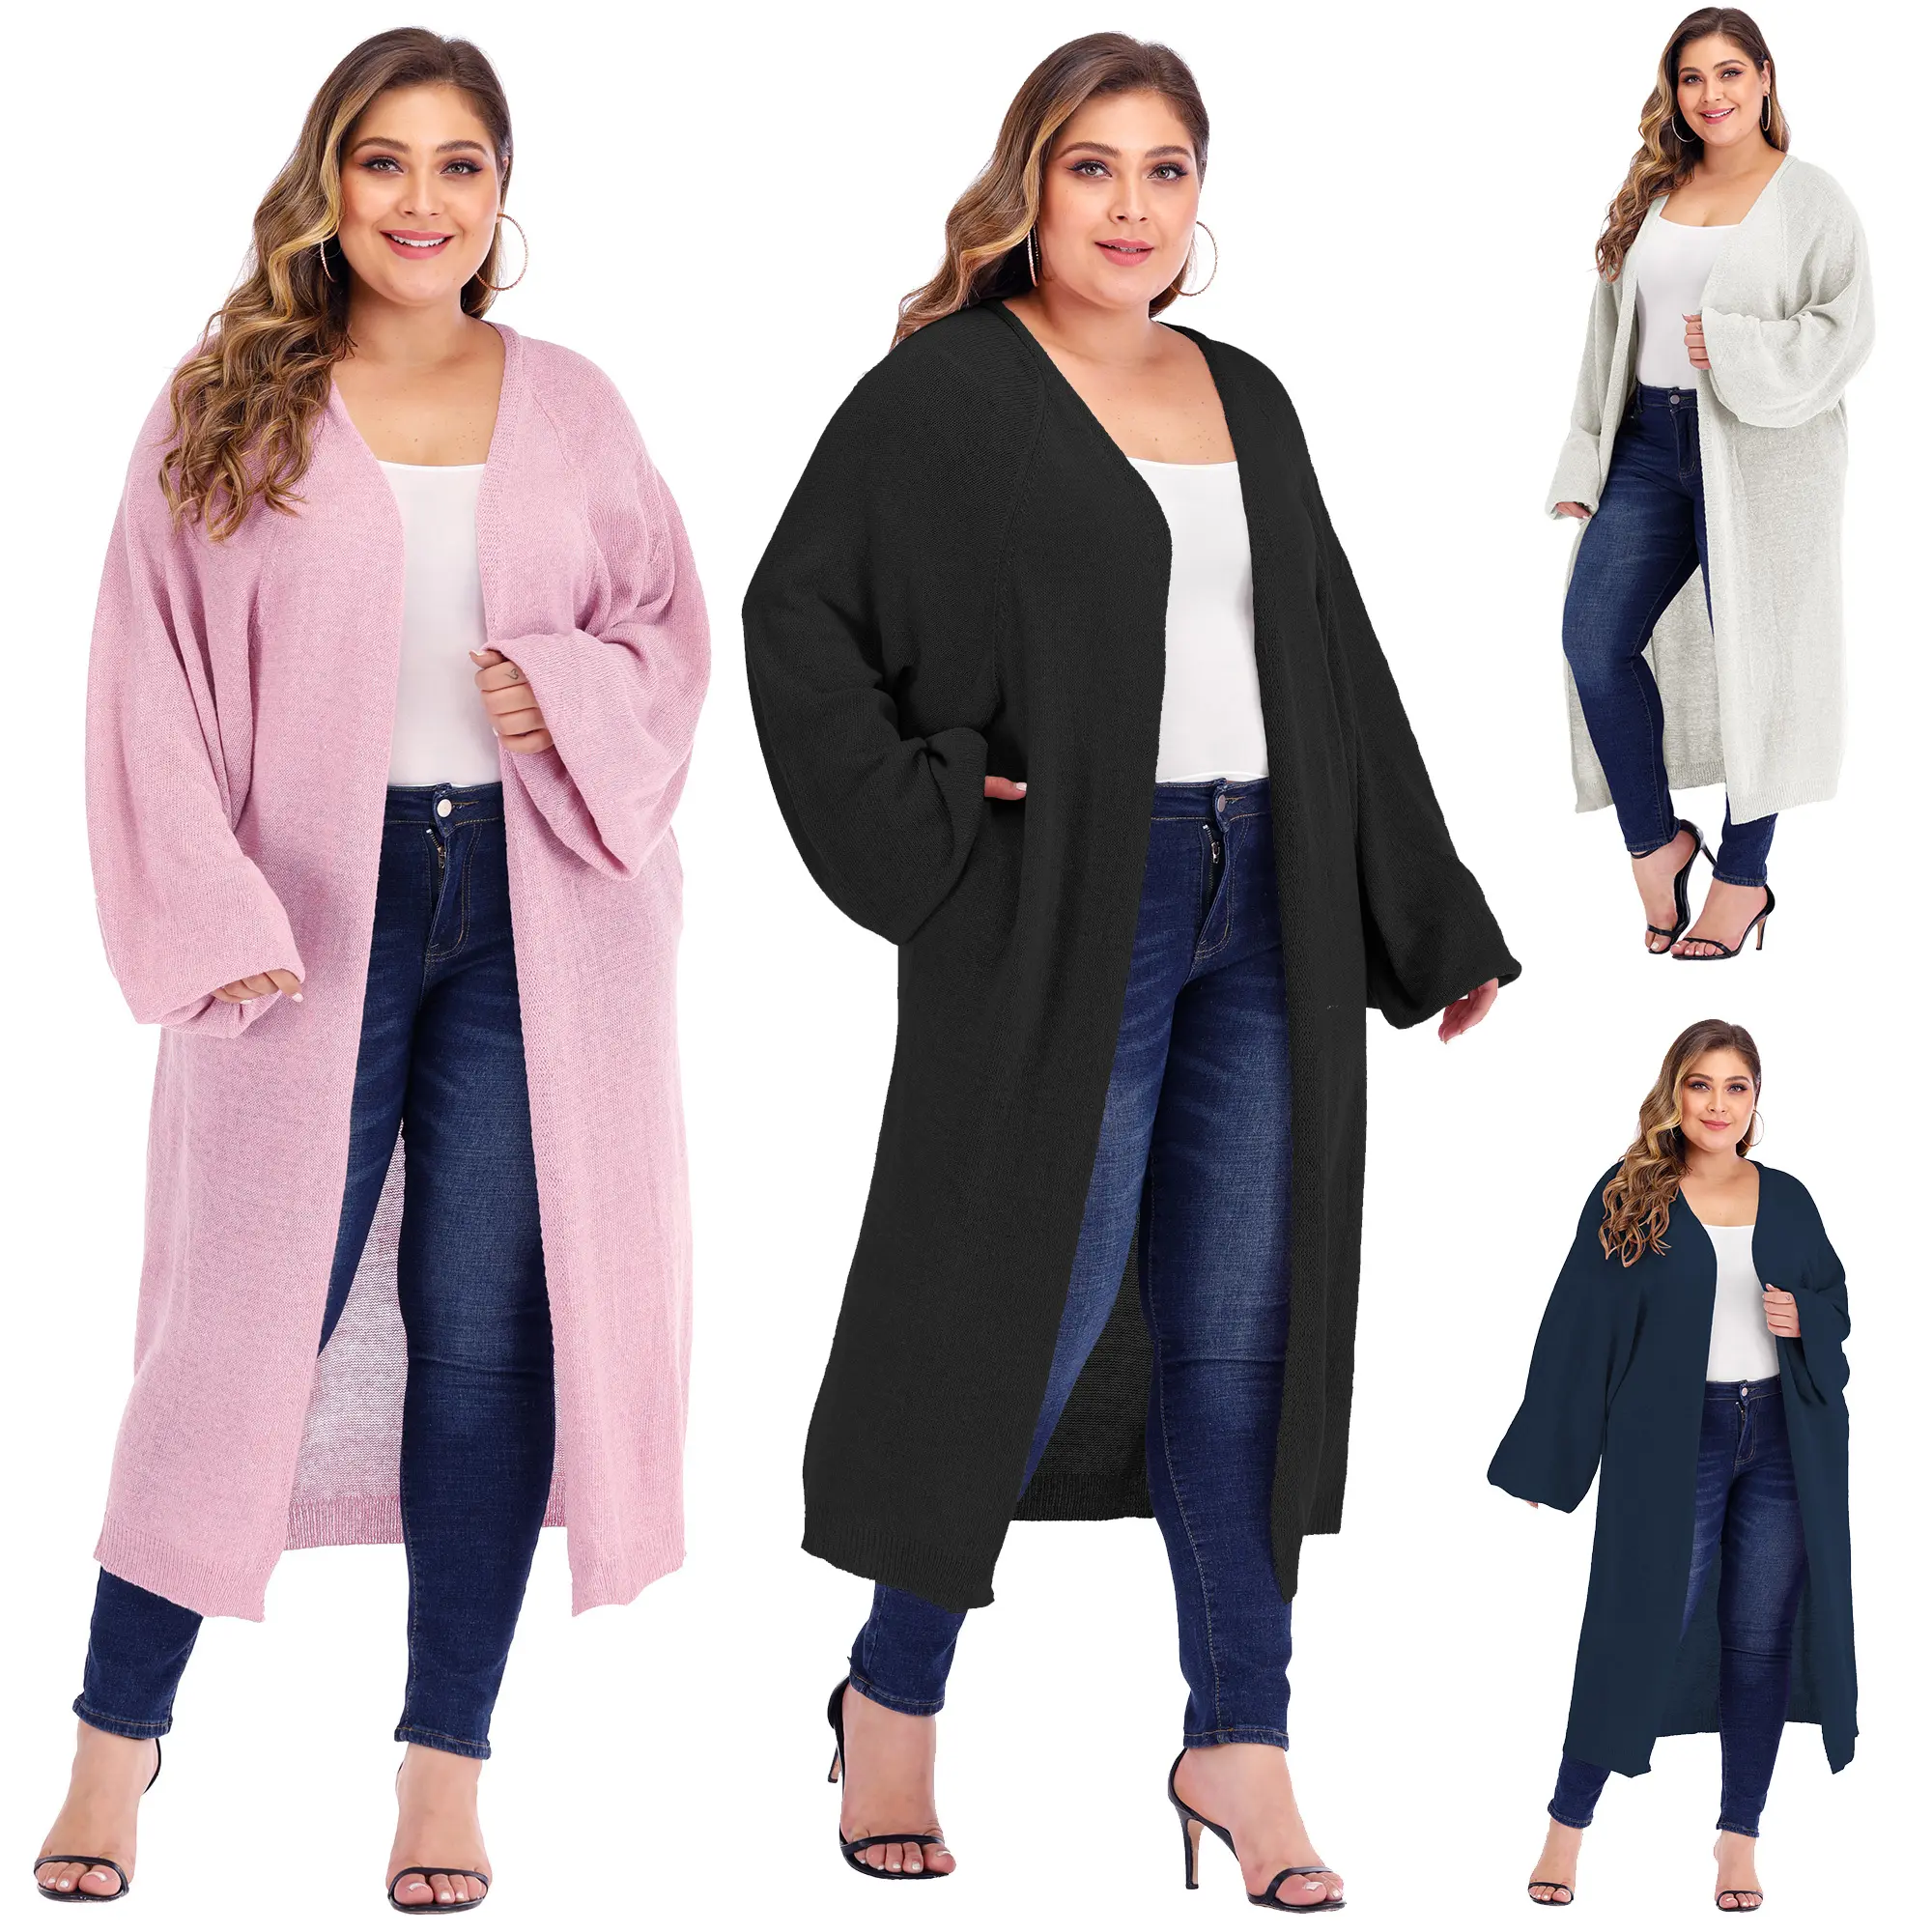 Plus Size Women Knitted Batwing Sleeve Long Sweater Cardigan Coat with Side Pockets for Women